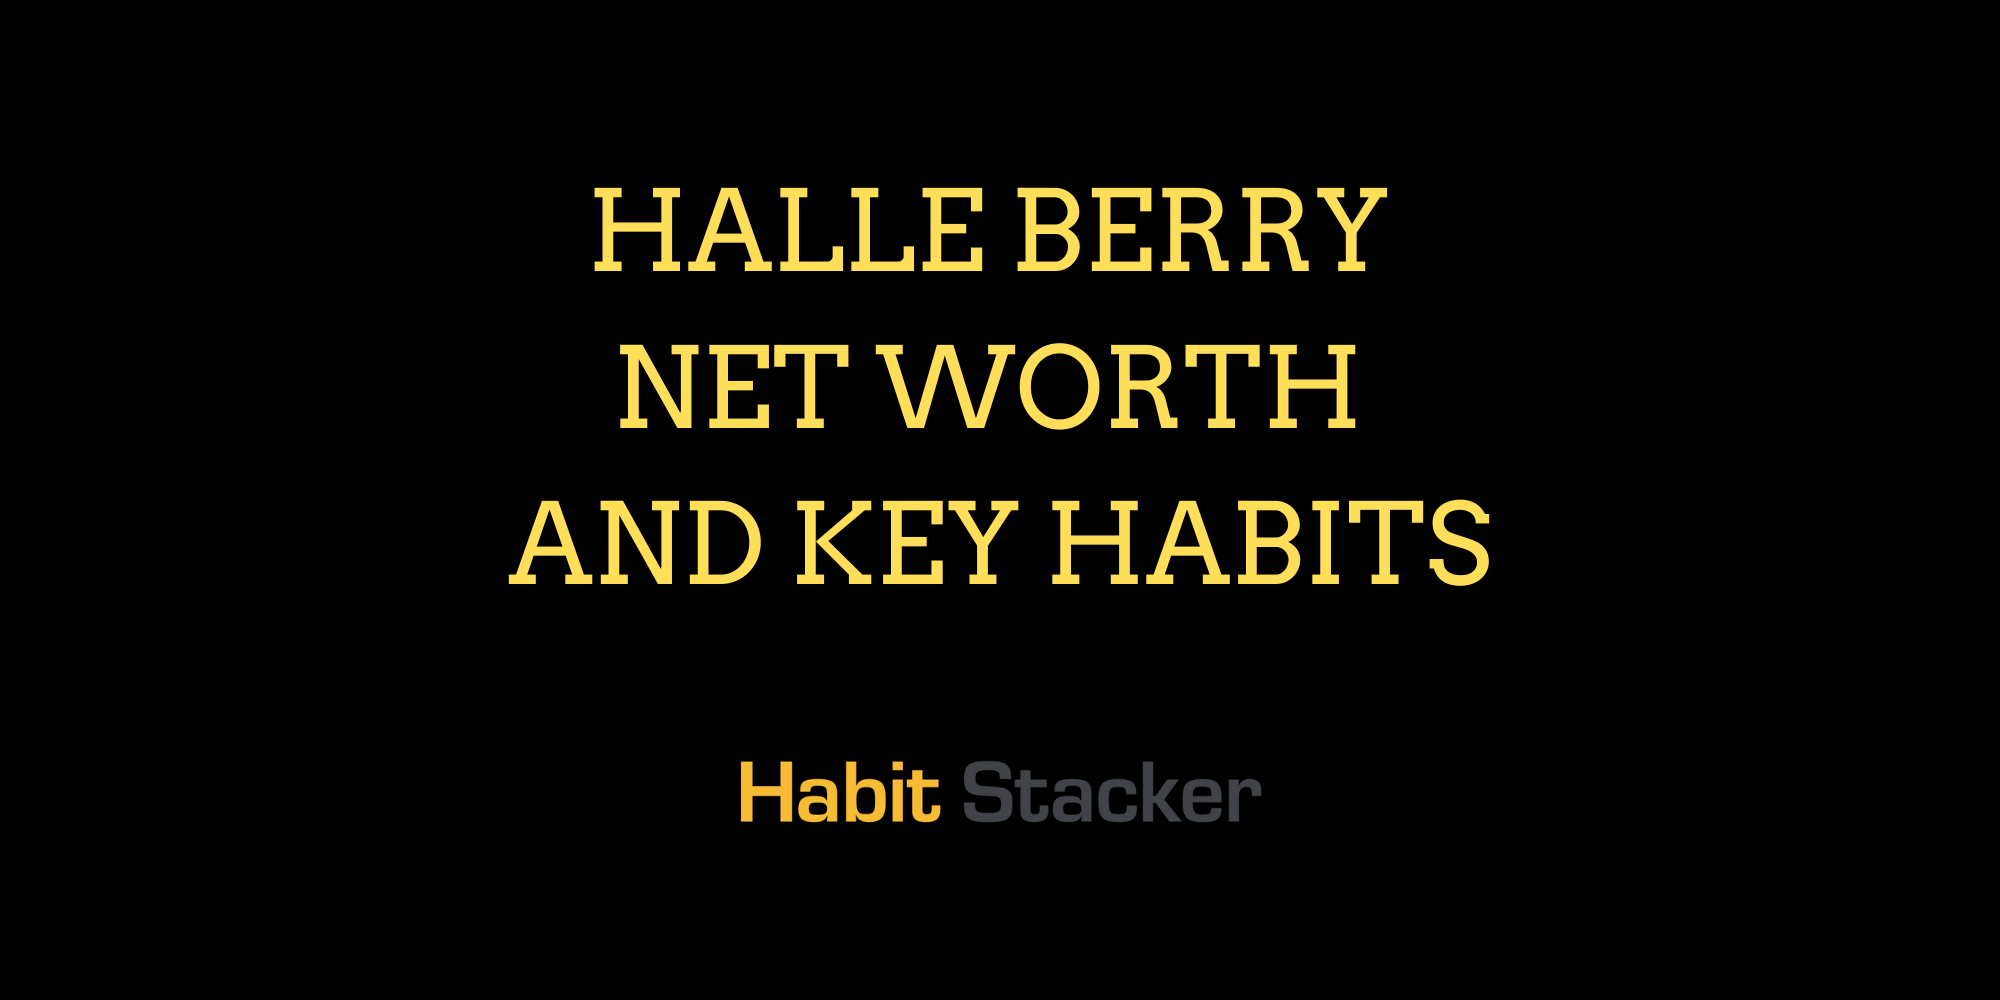 Halle Berry Net Worth and Key Habits